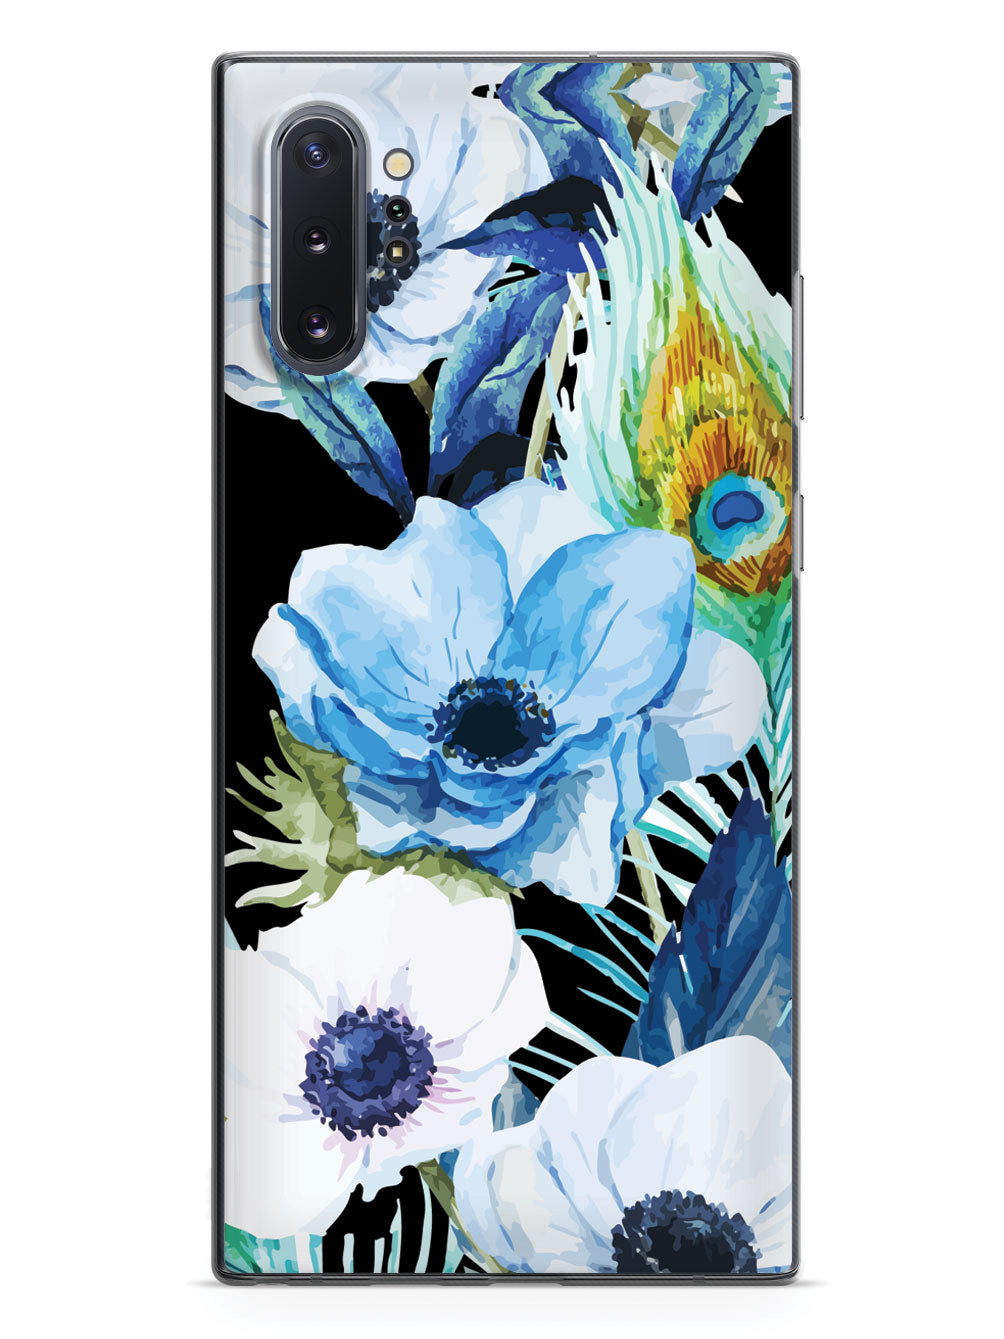 Peacock Feather Flowers - Black Case